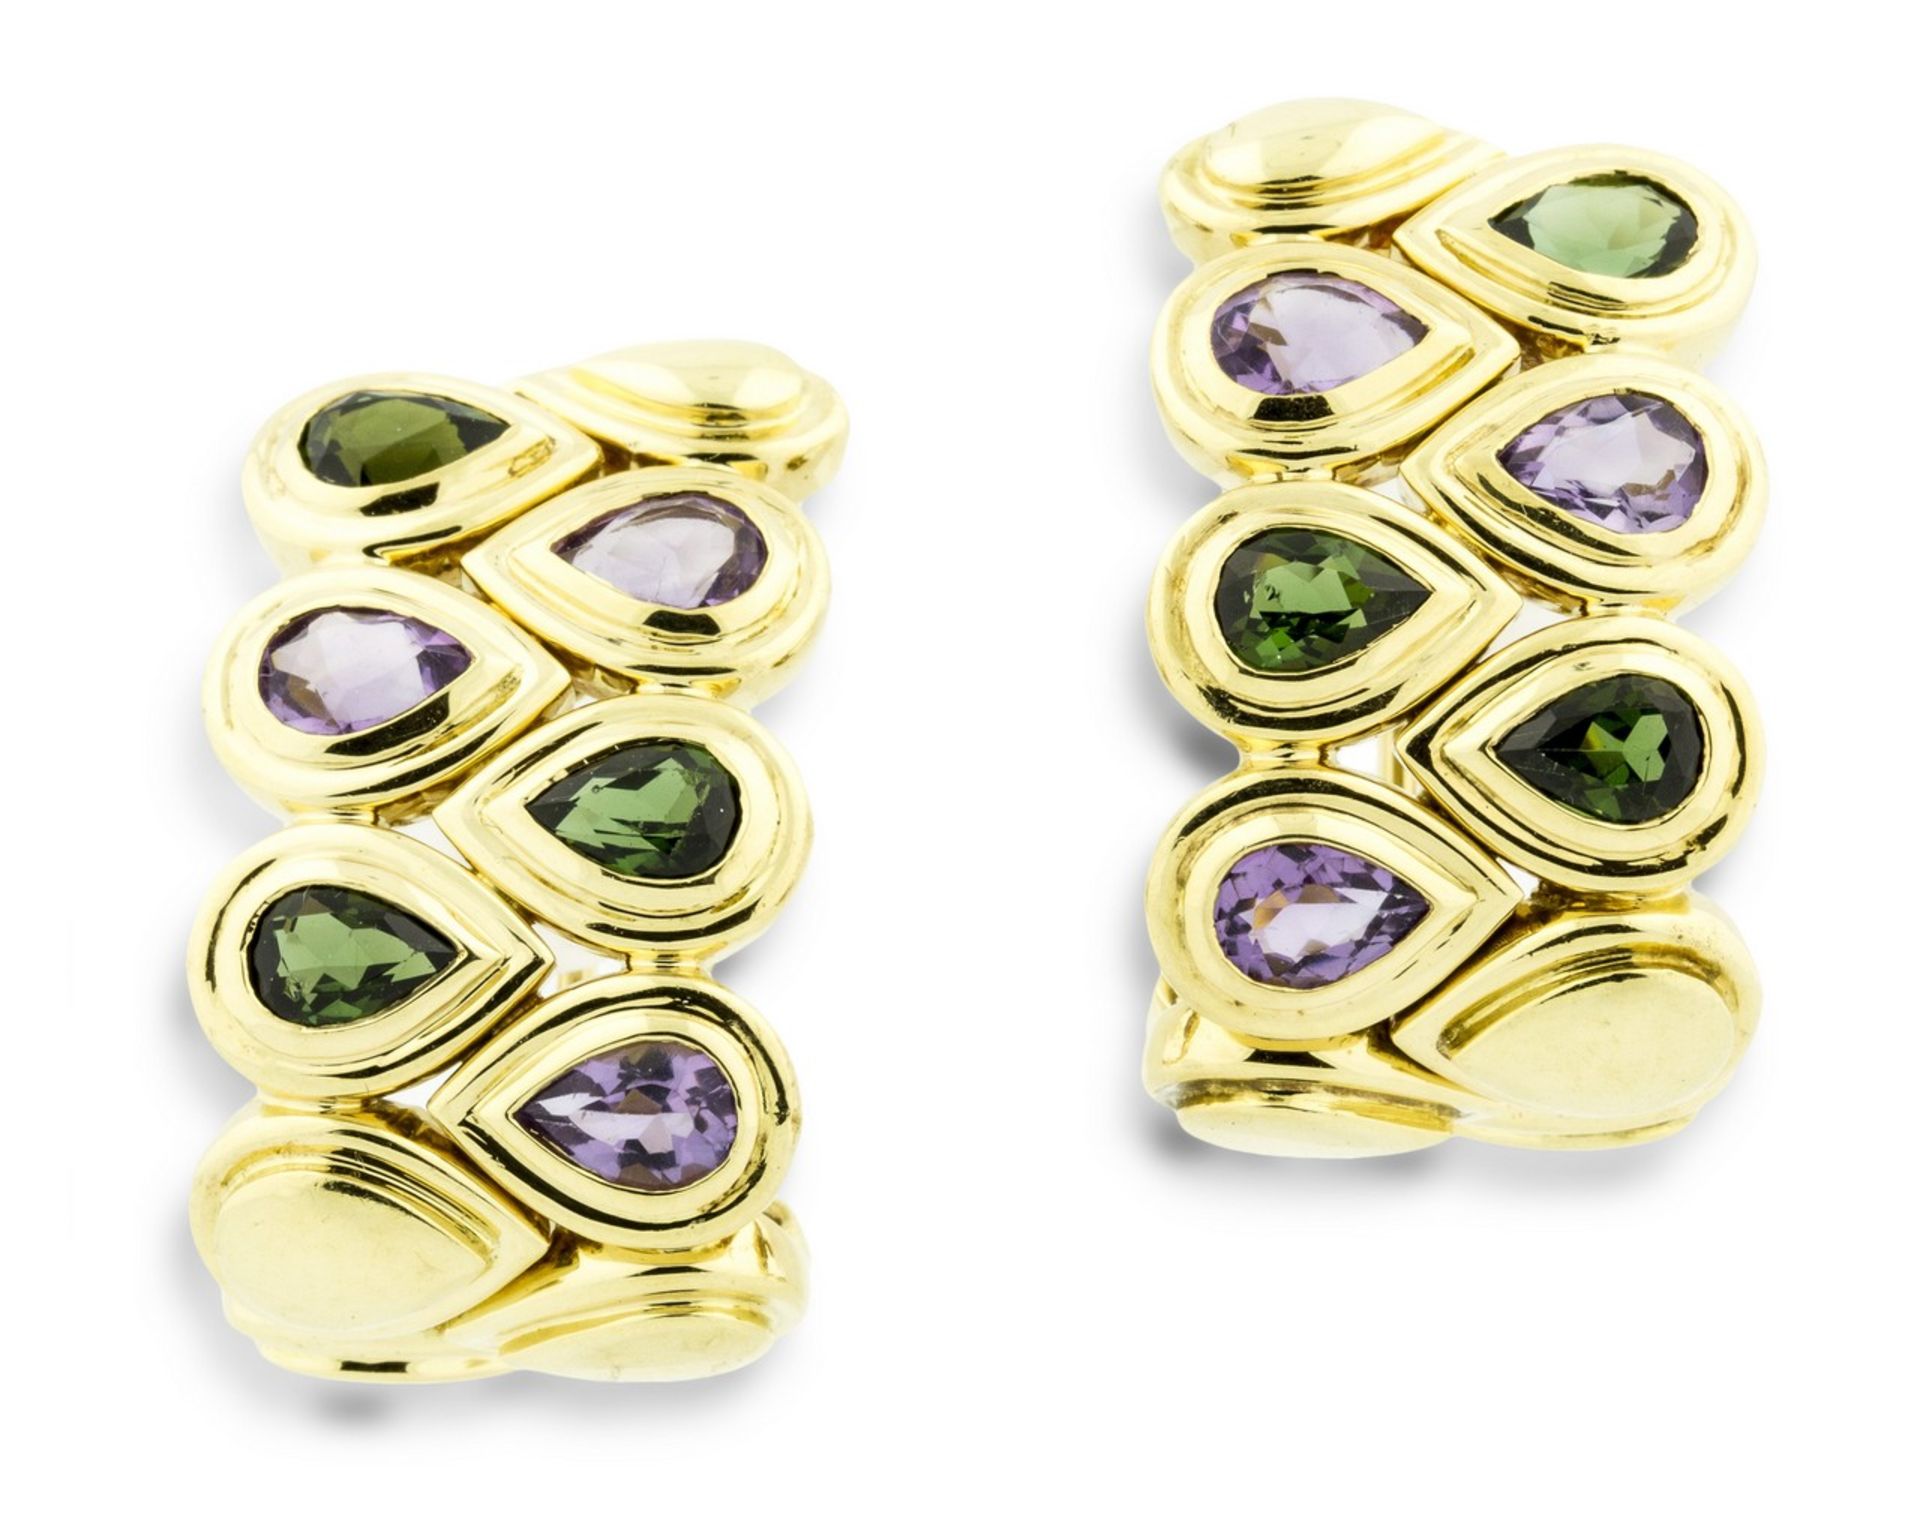 PAIR OF GEMSTONE EAR CLIPS Each bezel set with pear-shaped tourmalines and pear-shaped amethyst,